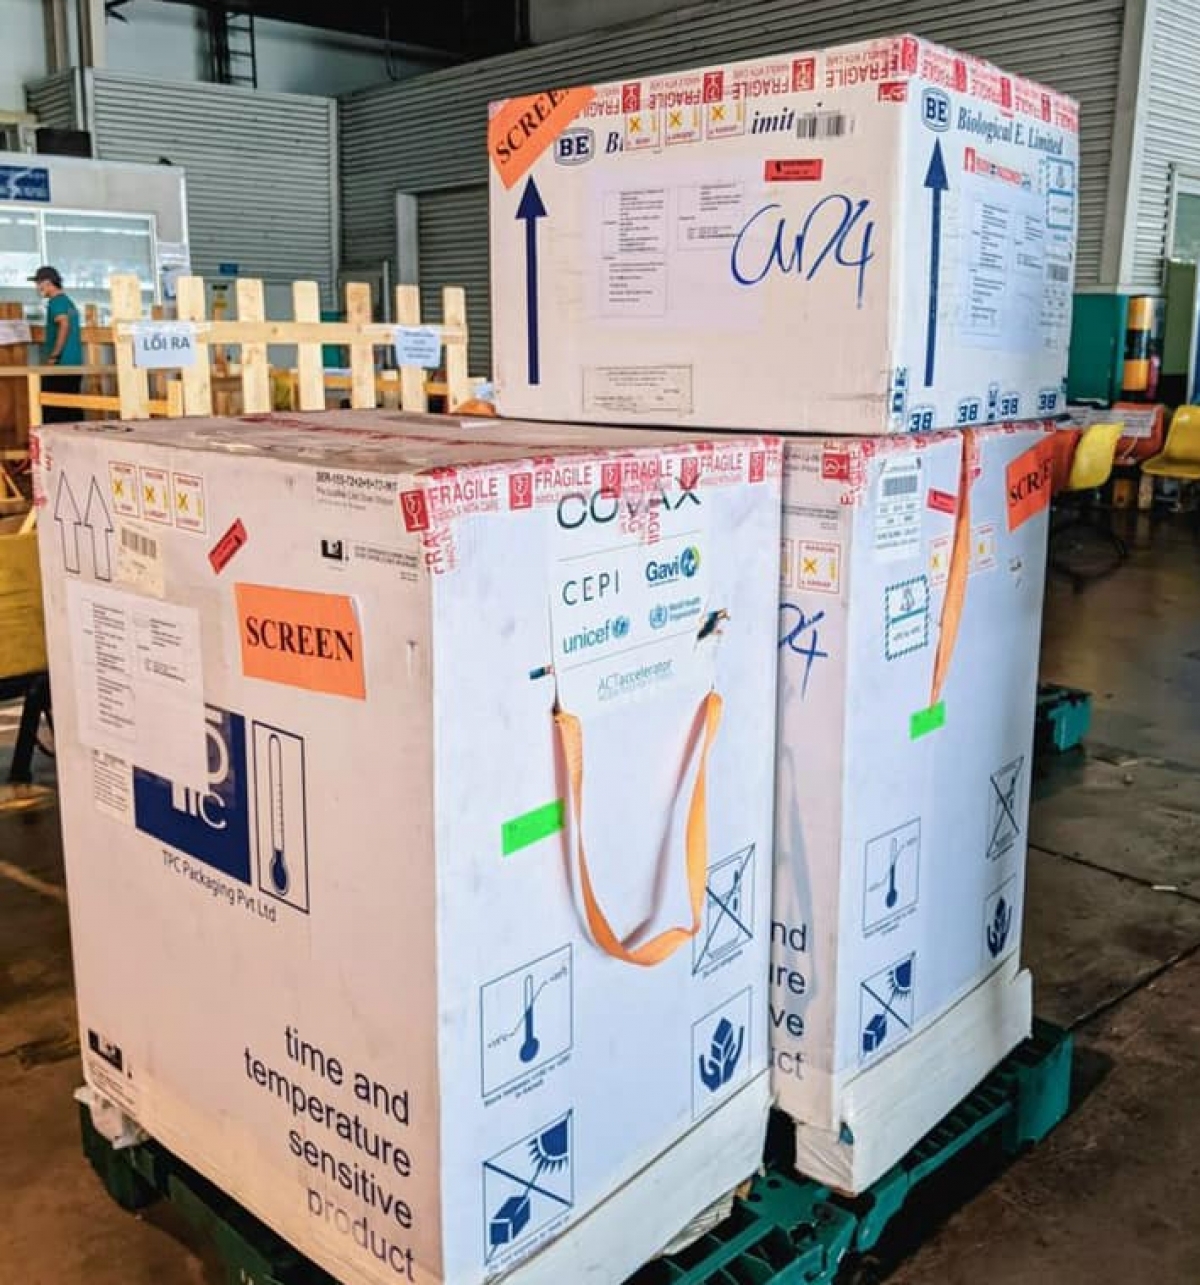 Papua New Guinea has delivered 30,000 doses of the AstraZeneca vaccine to Vietnam through COVAX